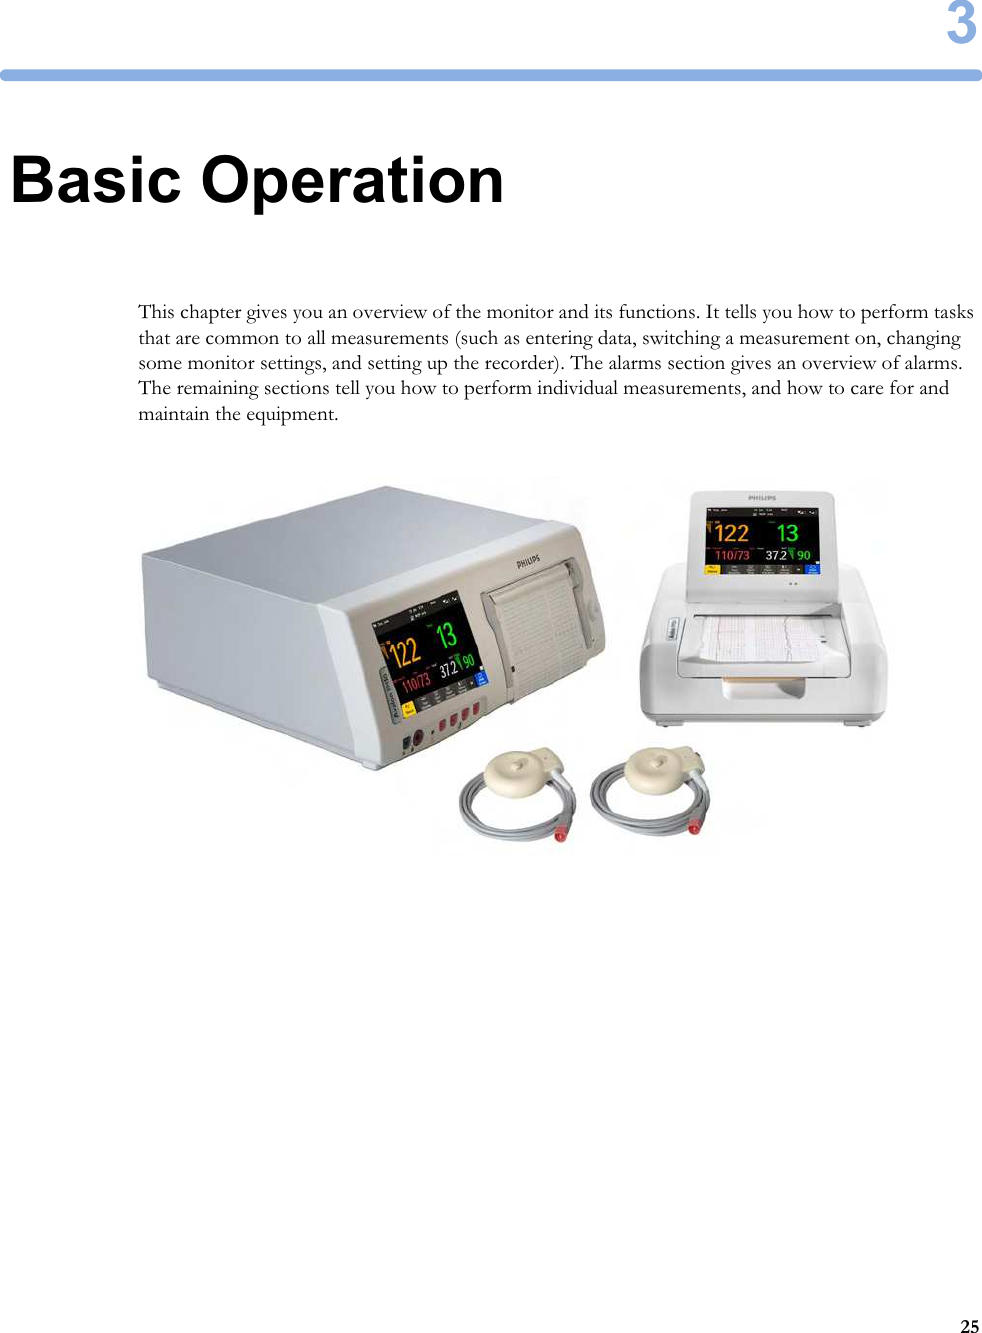 3253Basic OperationThis chapter gives you an overview of the monitor and its functions. It tells you how to perform tasks that are common to all measurements (such as entering data, switching a measurement on, changing some monitor settings, and setting up the recorder). The alarms section gives an overview of alarms. The remaining sections tell you how to perform individual measurements, and how to care for and maintain the equipment.